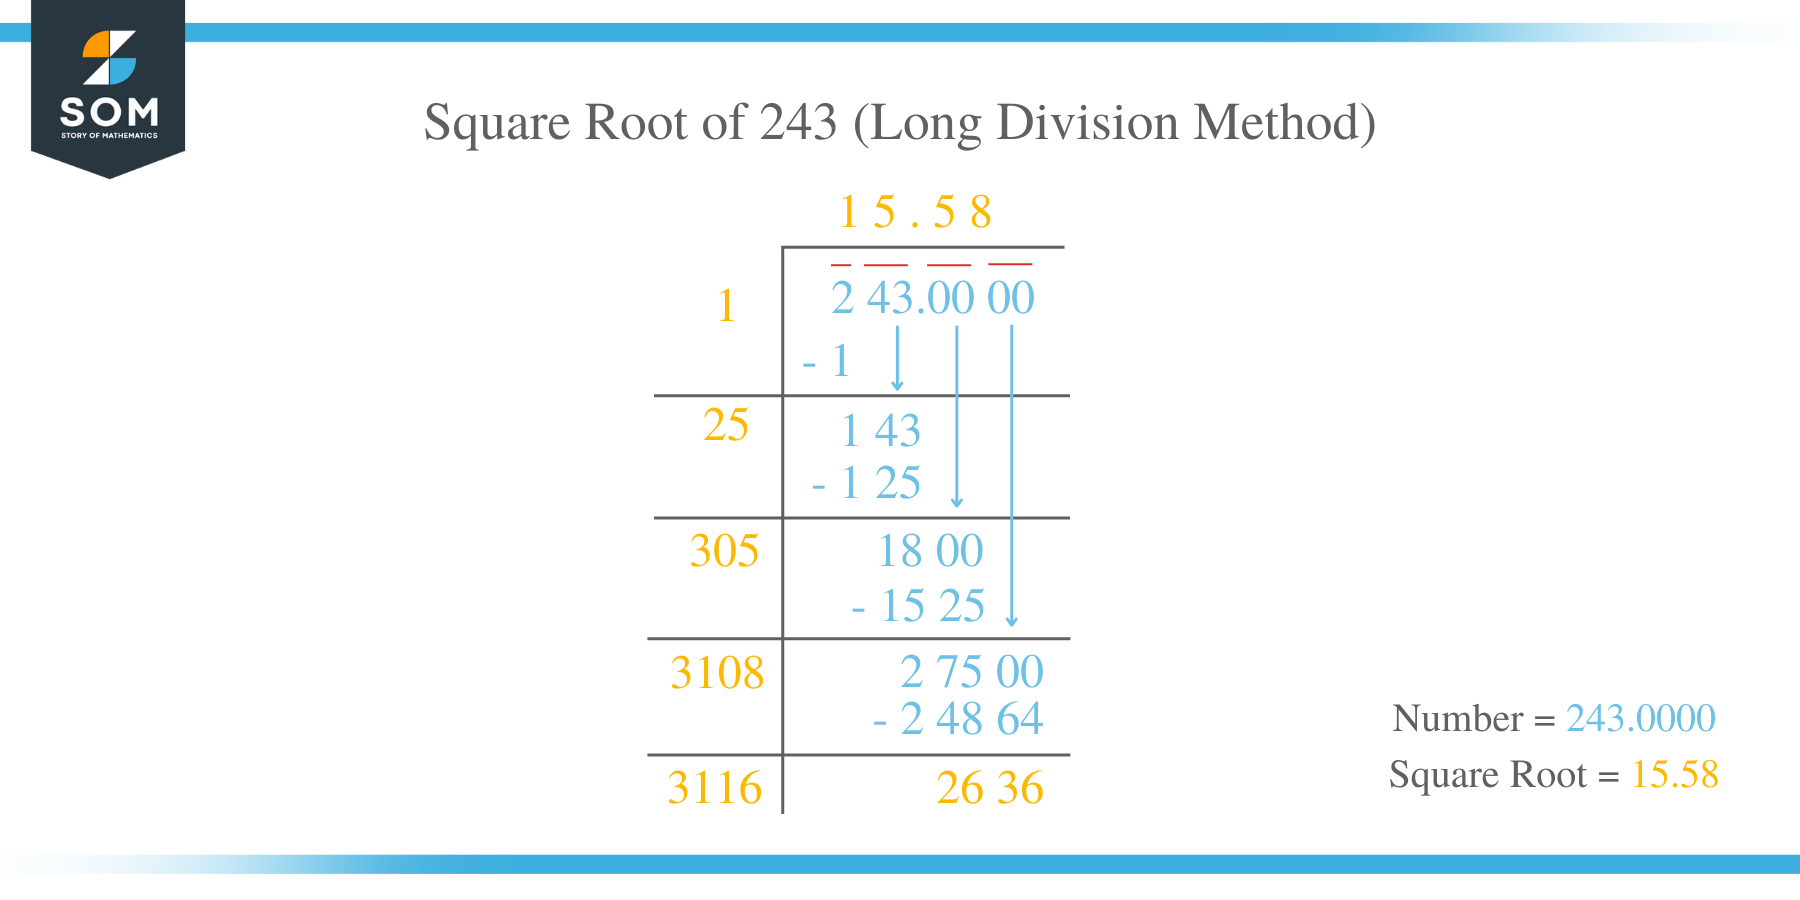 Square Root of 243 by Long Division Method